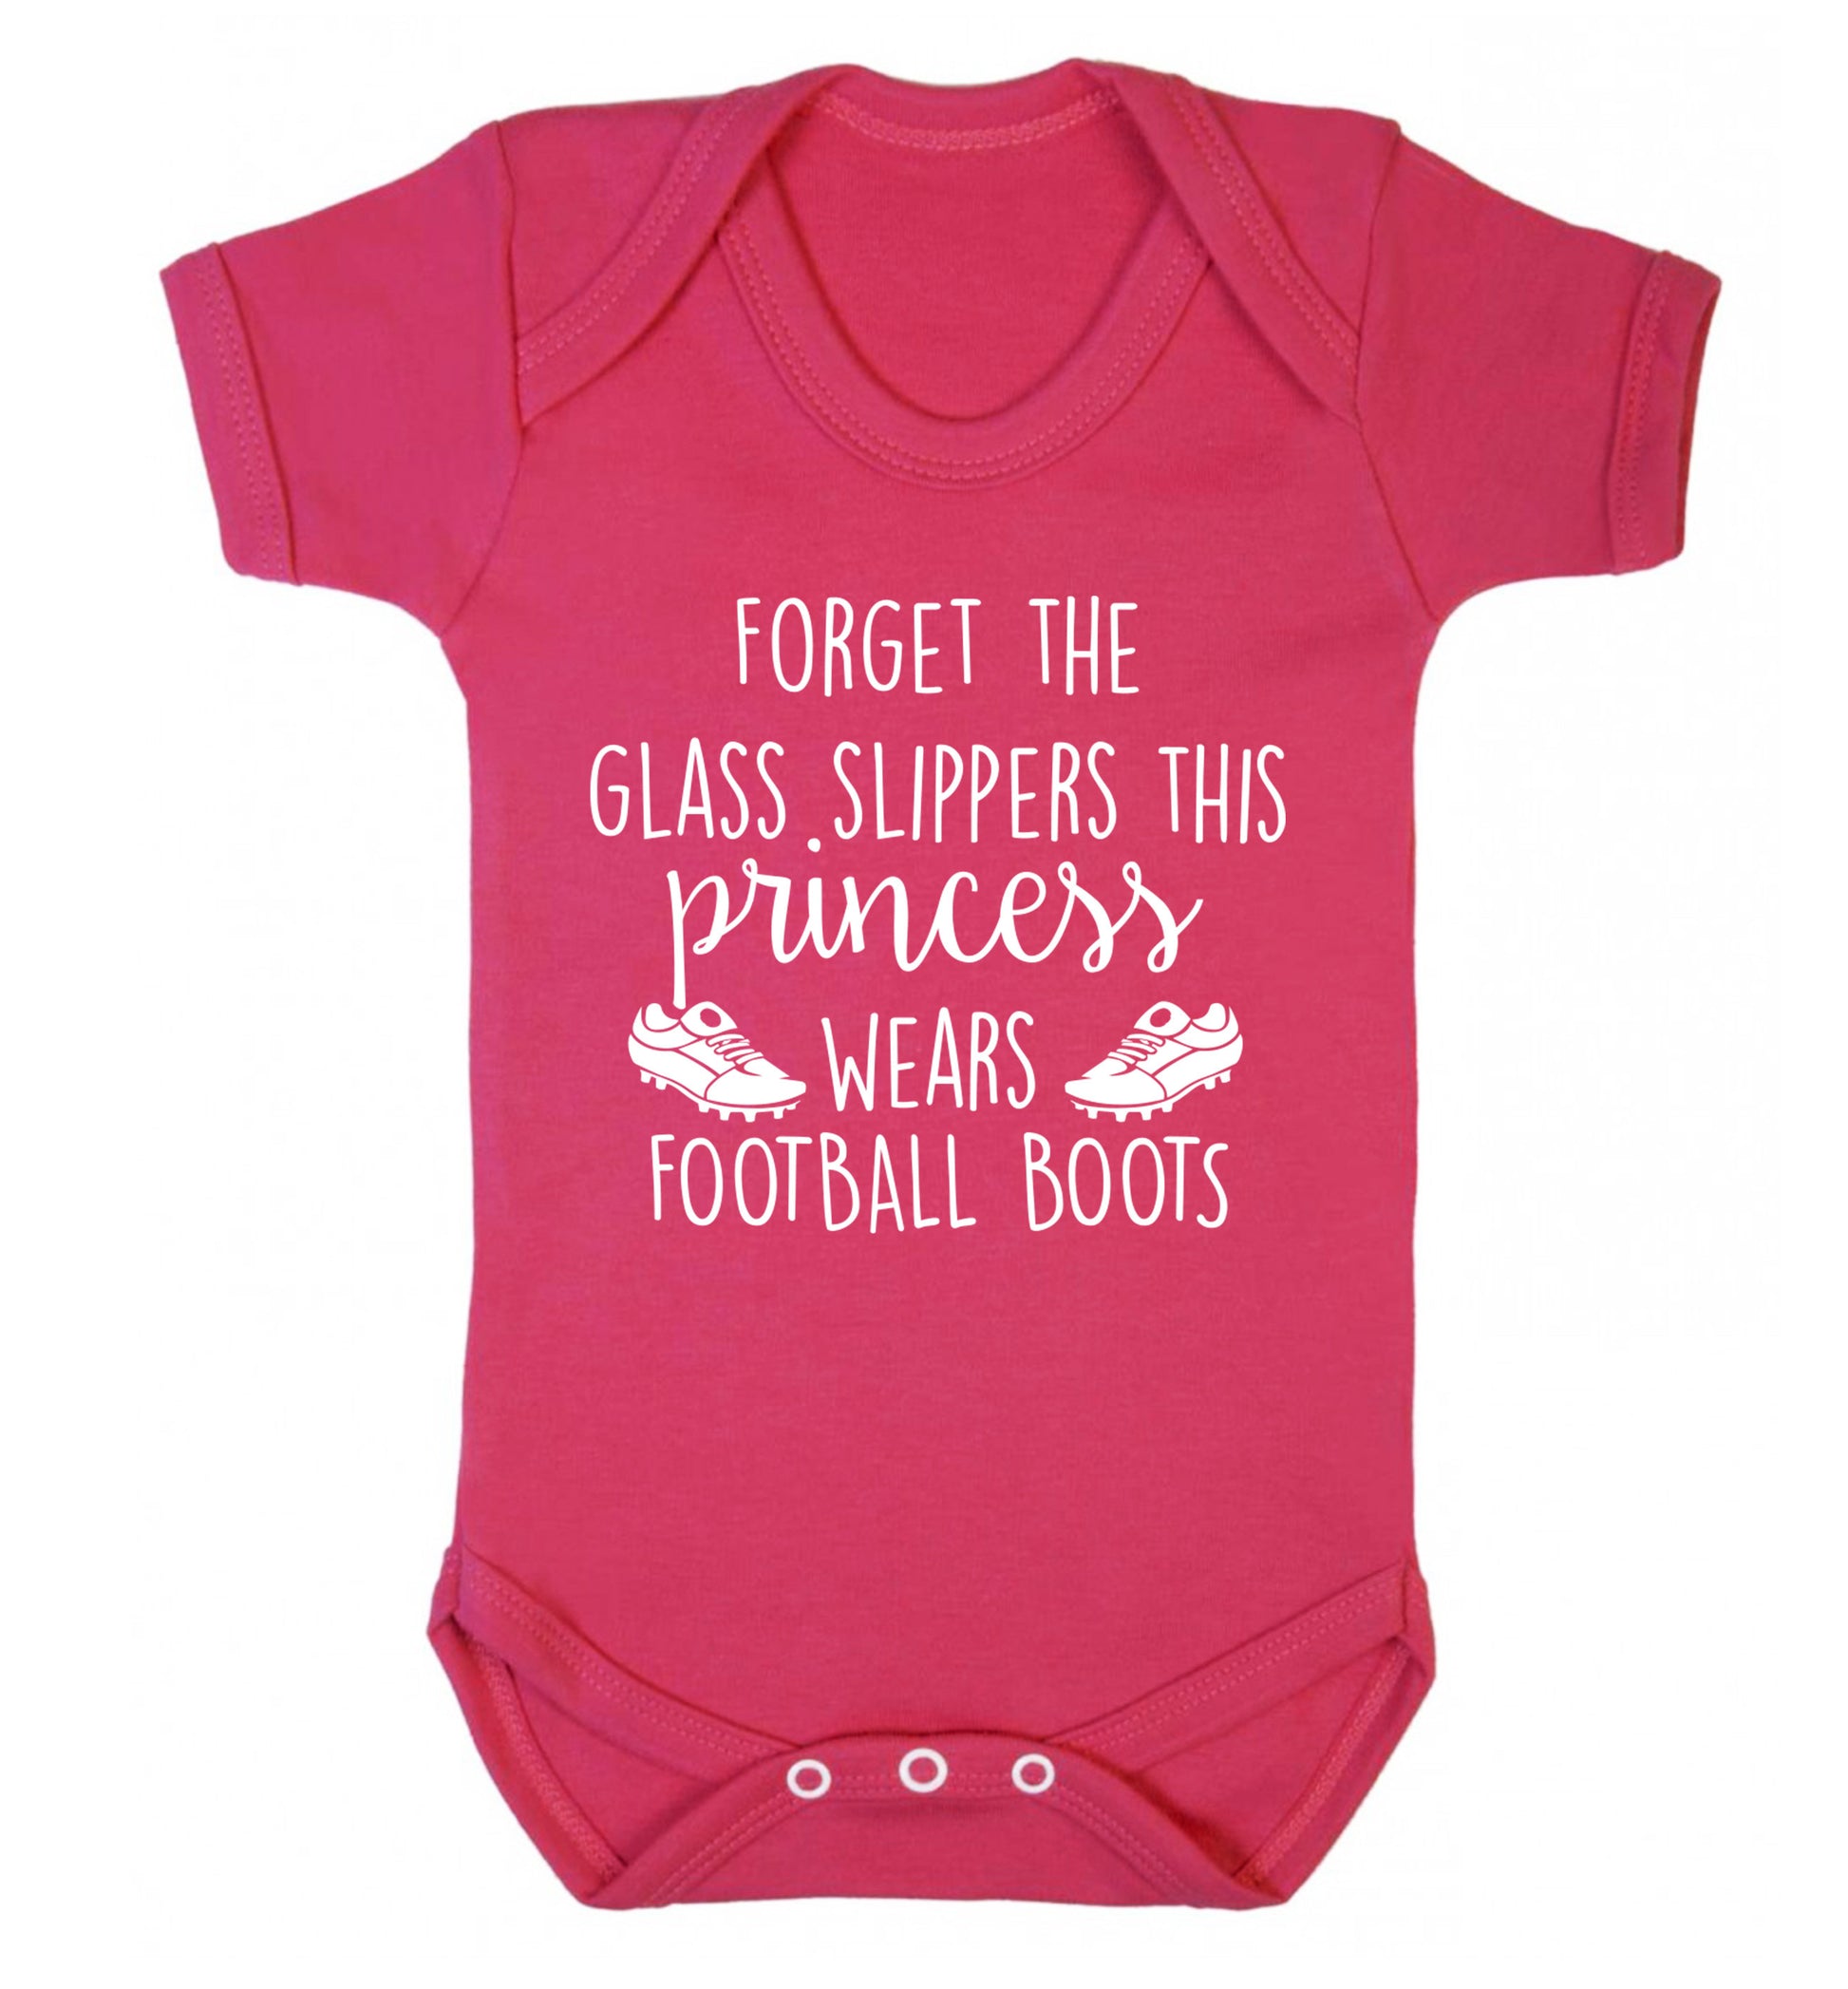 Forget the glass slippers this princess wears football boots Baby Vest dark pink 18-24 months